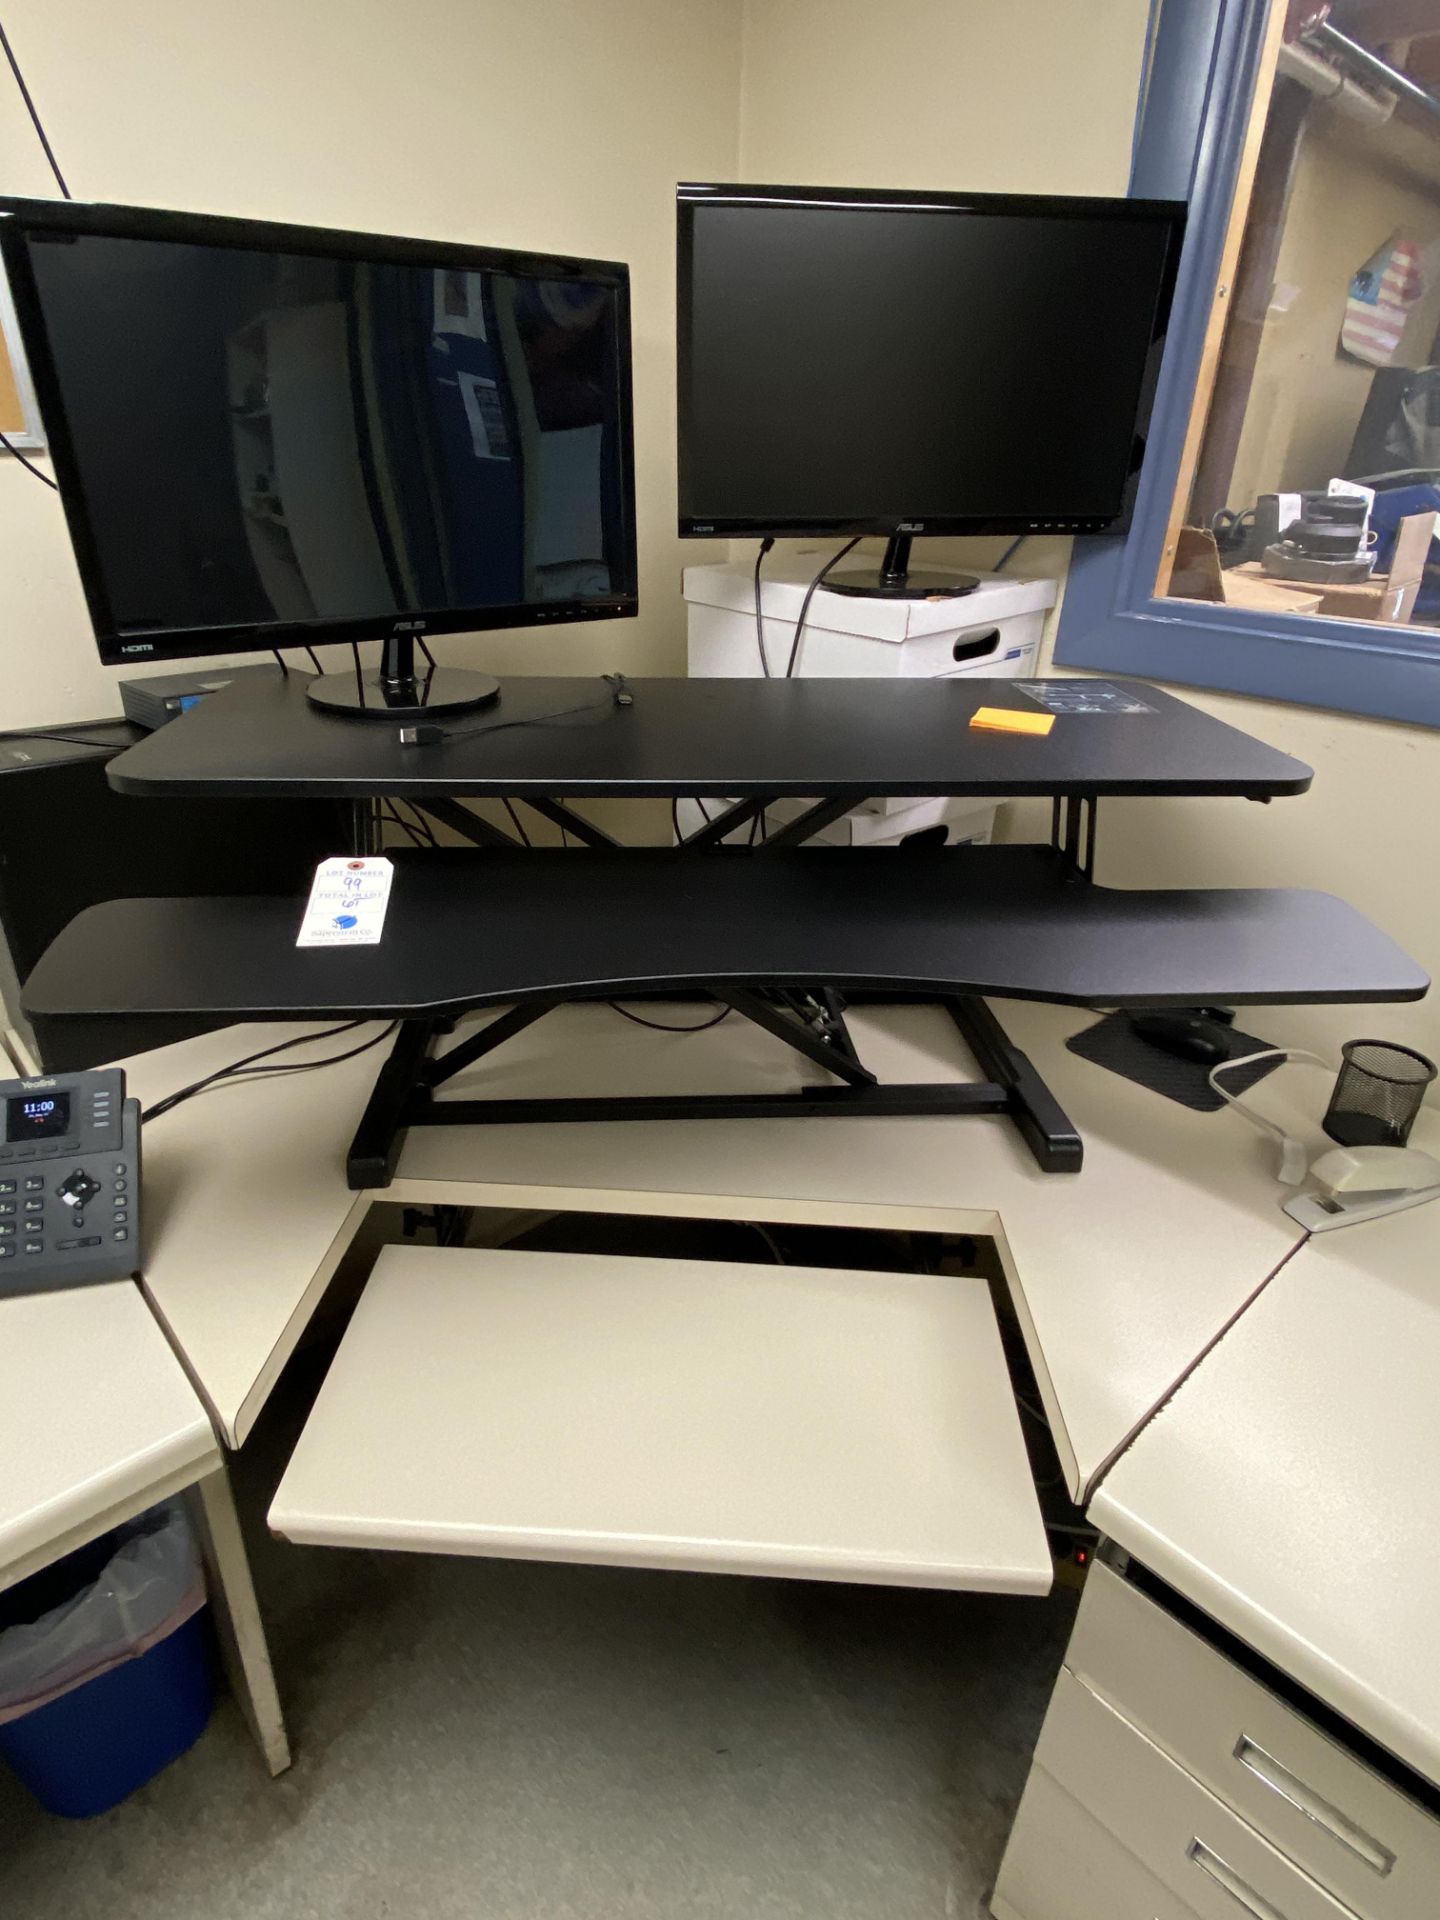 {LOT} In Office, Desk Chairs 5 Monitors MUST TAKE ALL